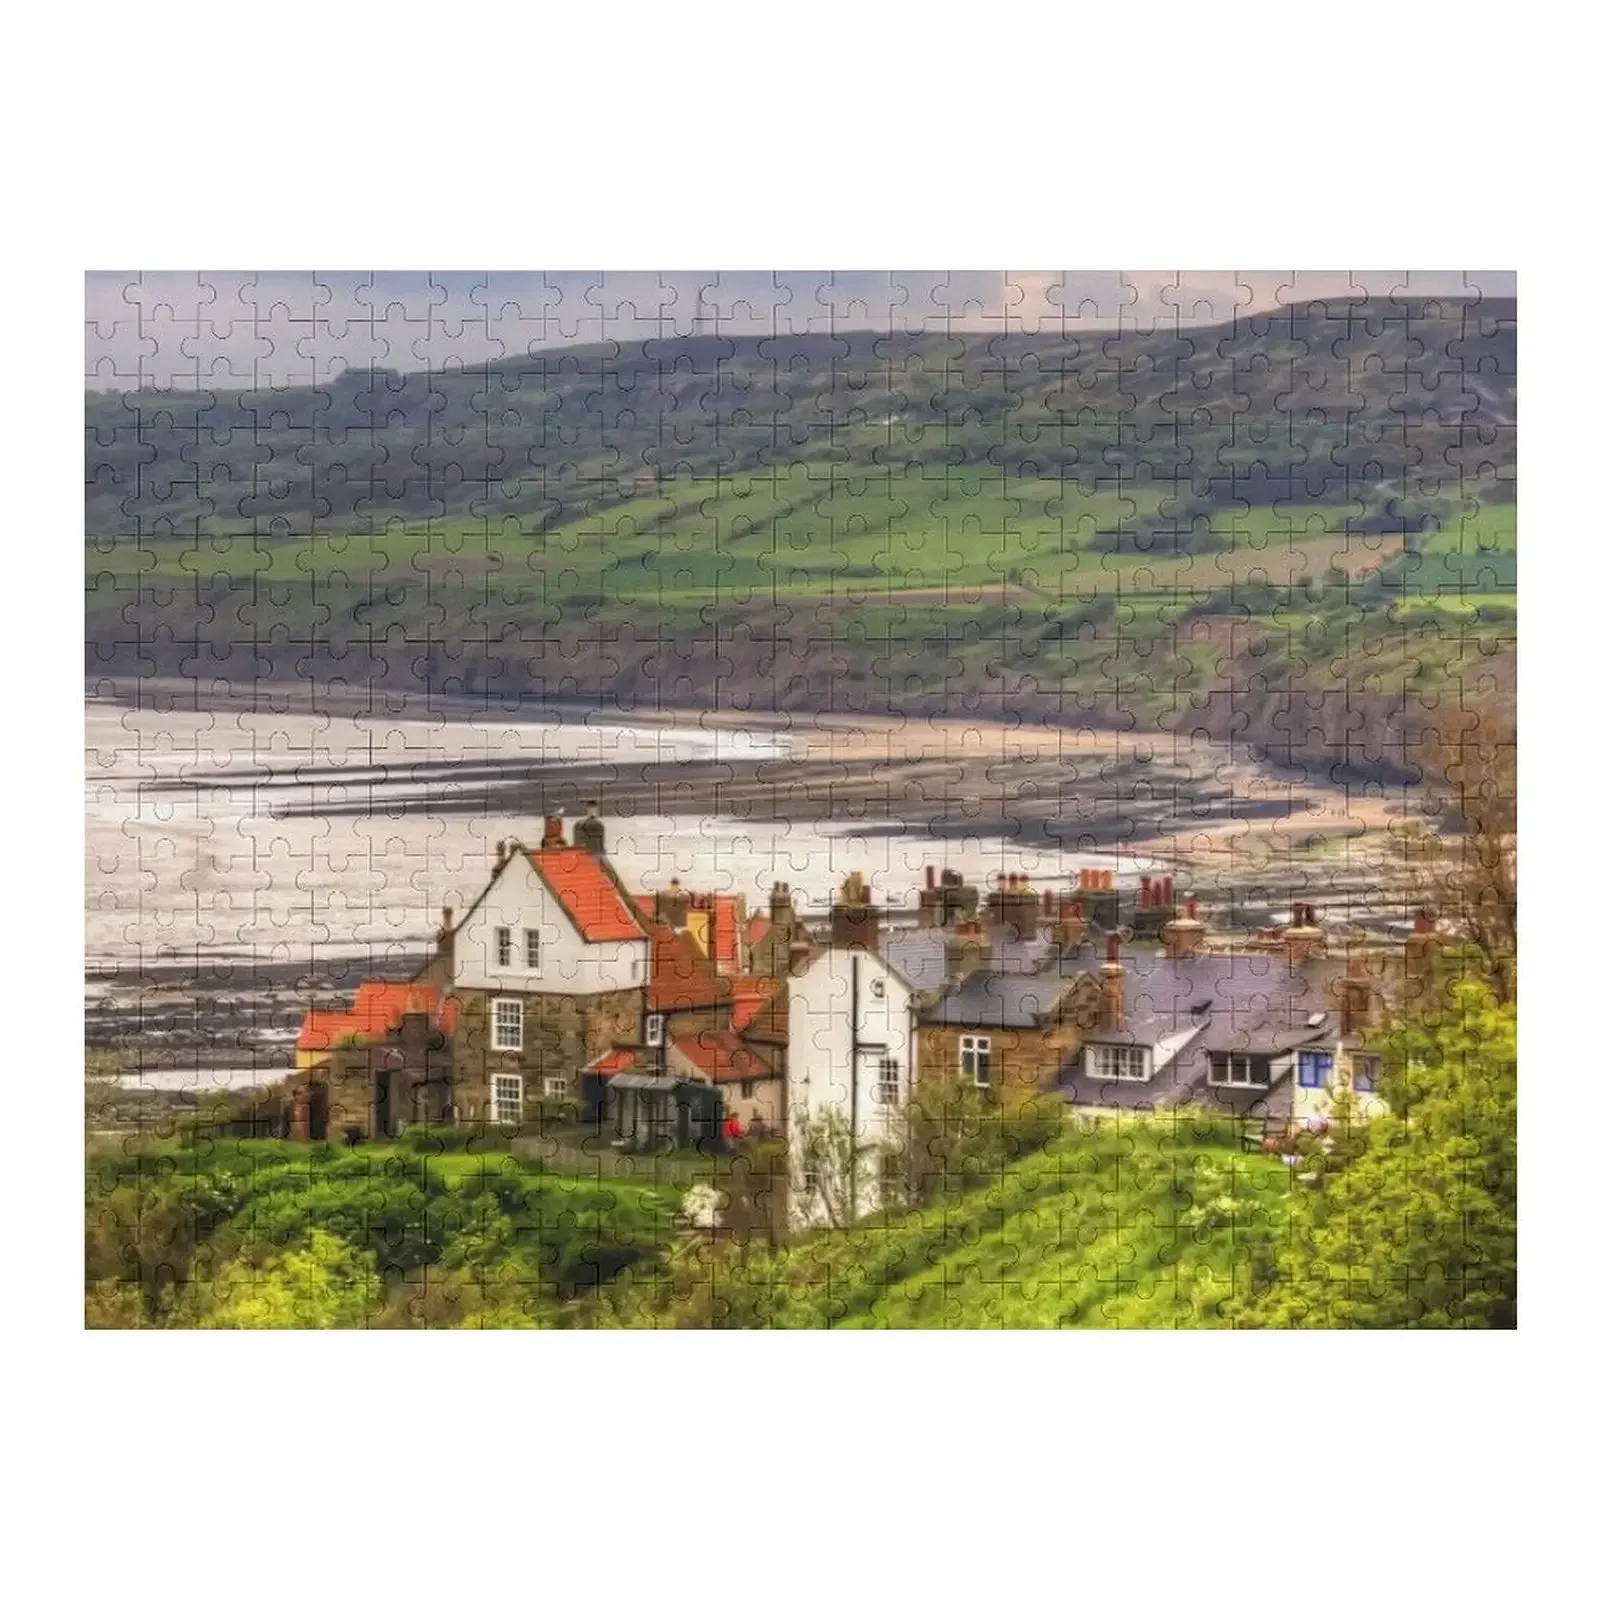 First view of Robin Hood's Bay Jigsaw Puzzle Personalised Woods For Adults Jigsaw For Kids Wooden Name Puzzle robin hood vintage rare movie poster print jigsaw puzzle baby wooden baby toy puzzle